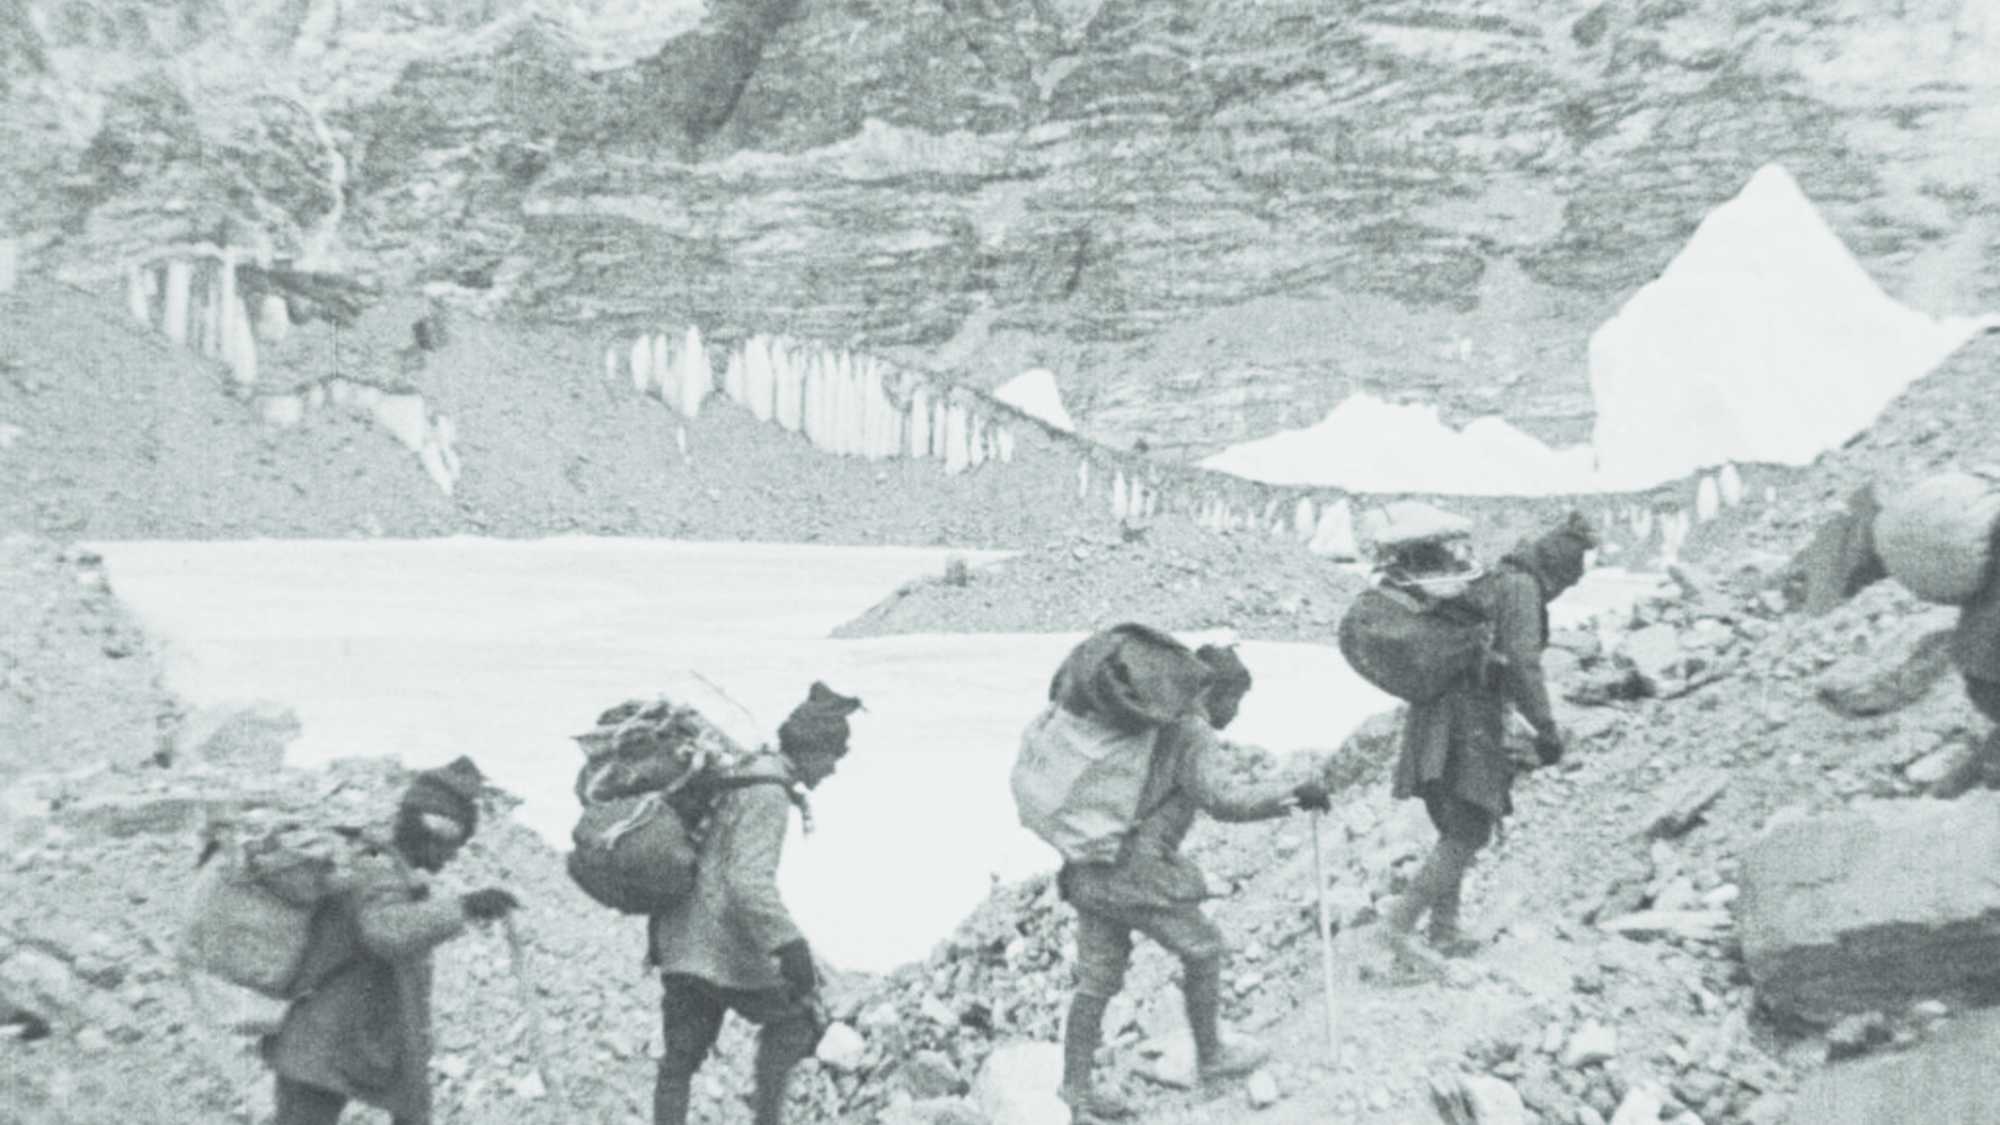 The Epic of Everest (image 3)